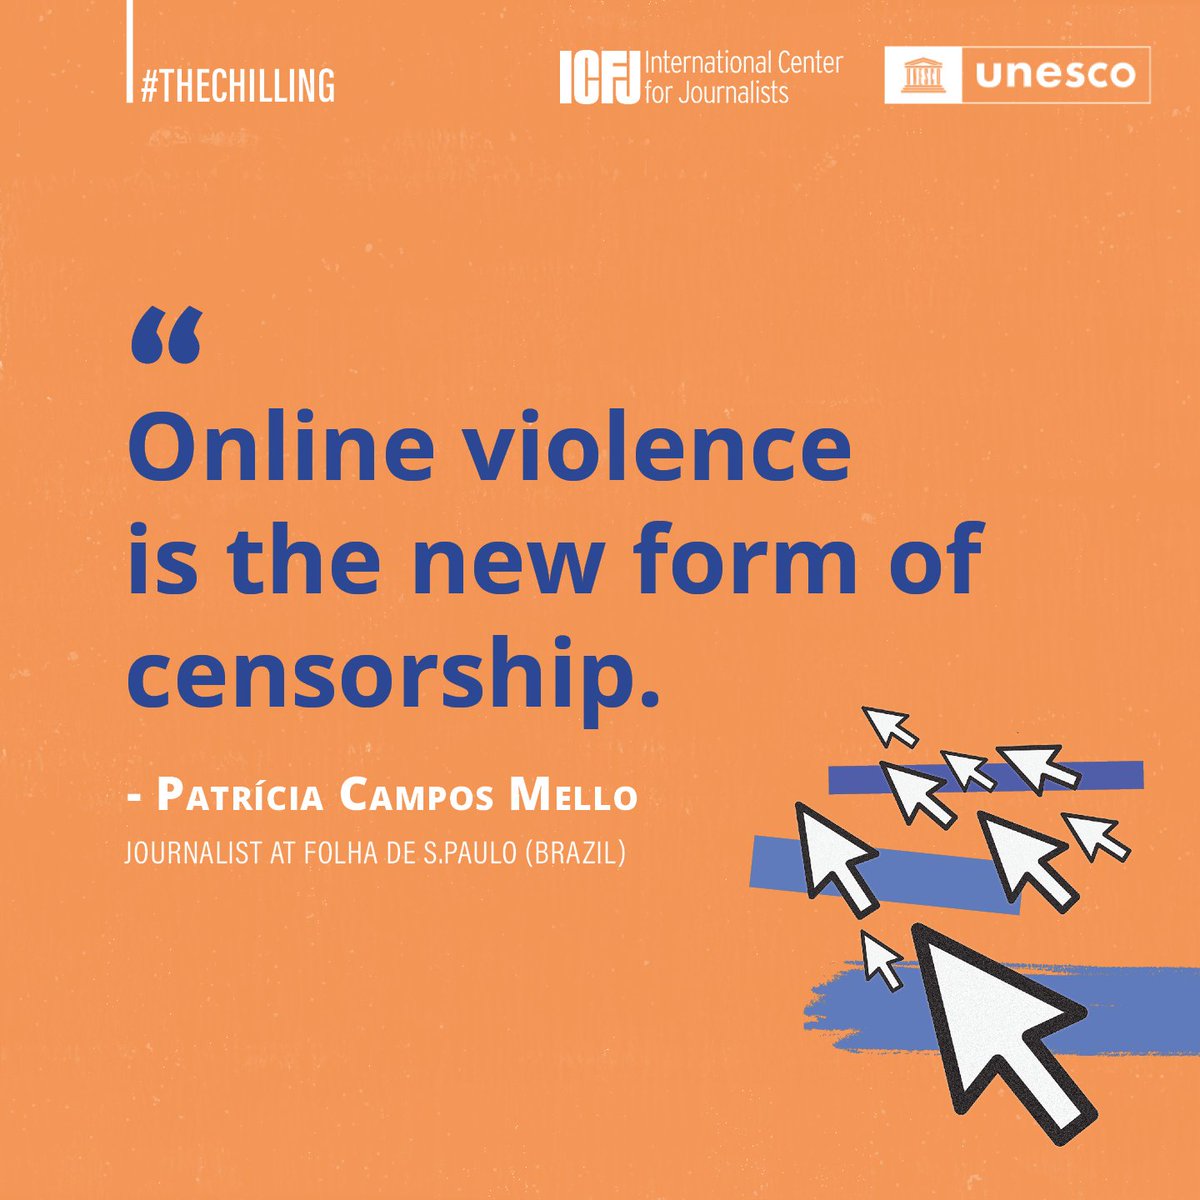 #TheChilling effect: inhibition or discouragement to exercise your freedom of expression, as well as other human rights.

Online violence causes many #womenjournalists to self-censor.

Let's put an end to it!

on.unesco.org/3rqmRpV